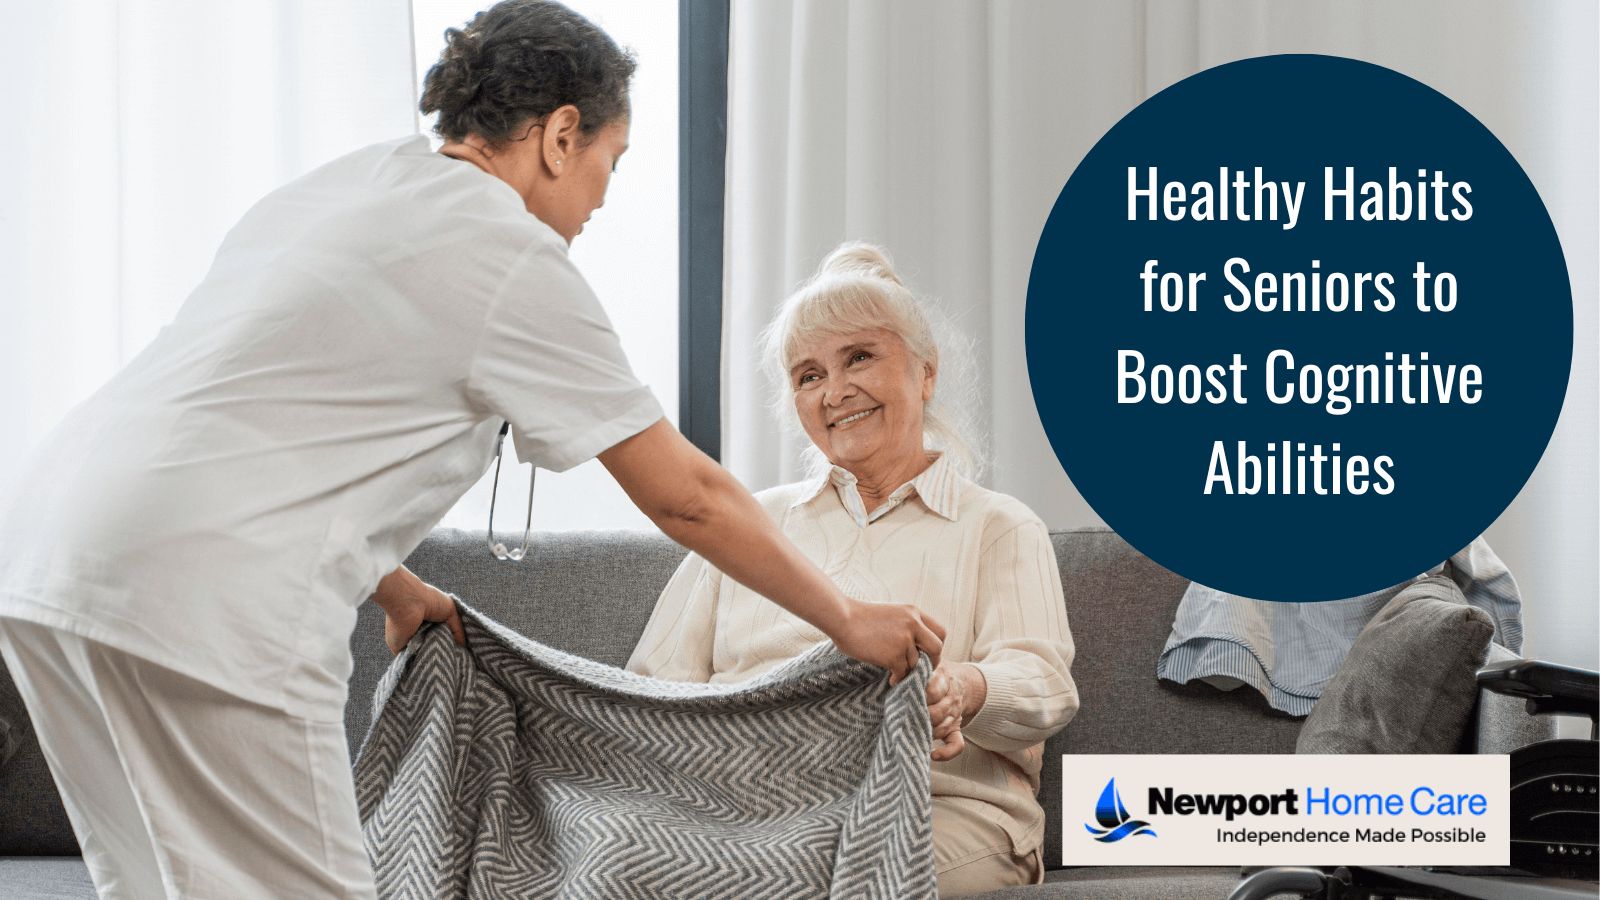 Healthy Habits for Seniors to Boost Cognitive Abilities